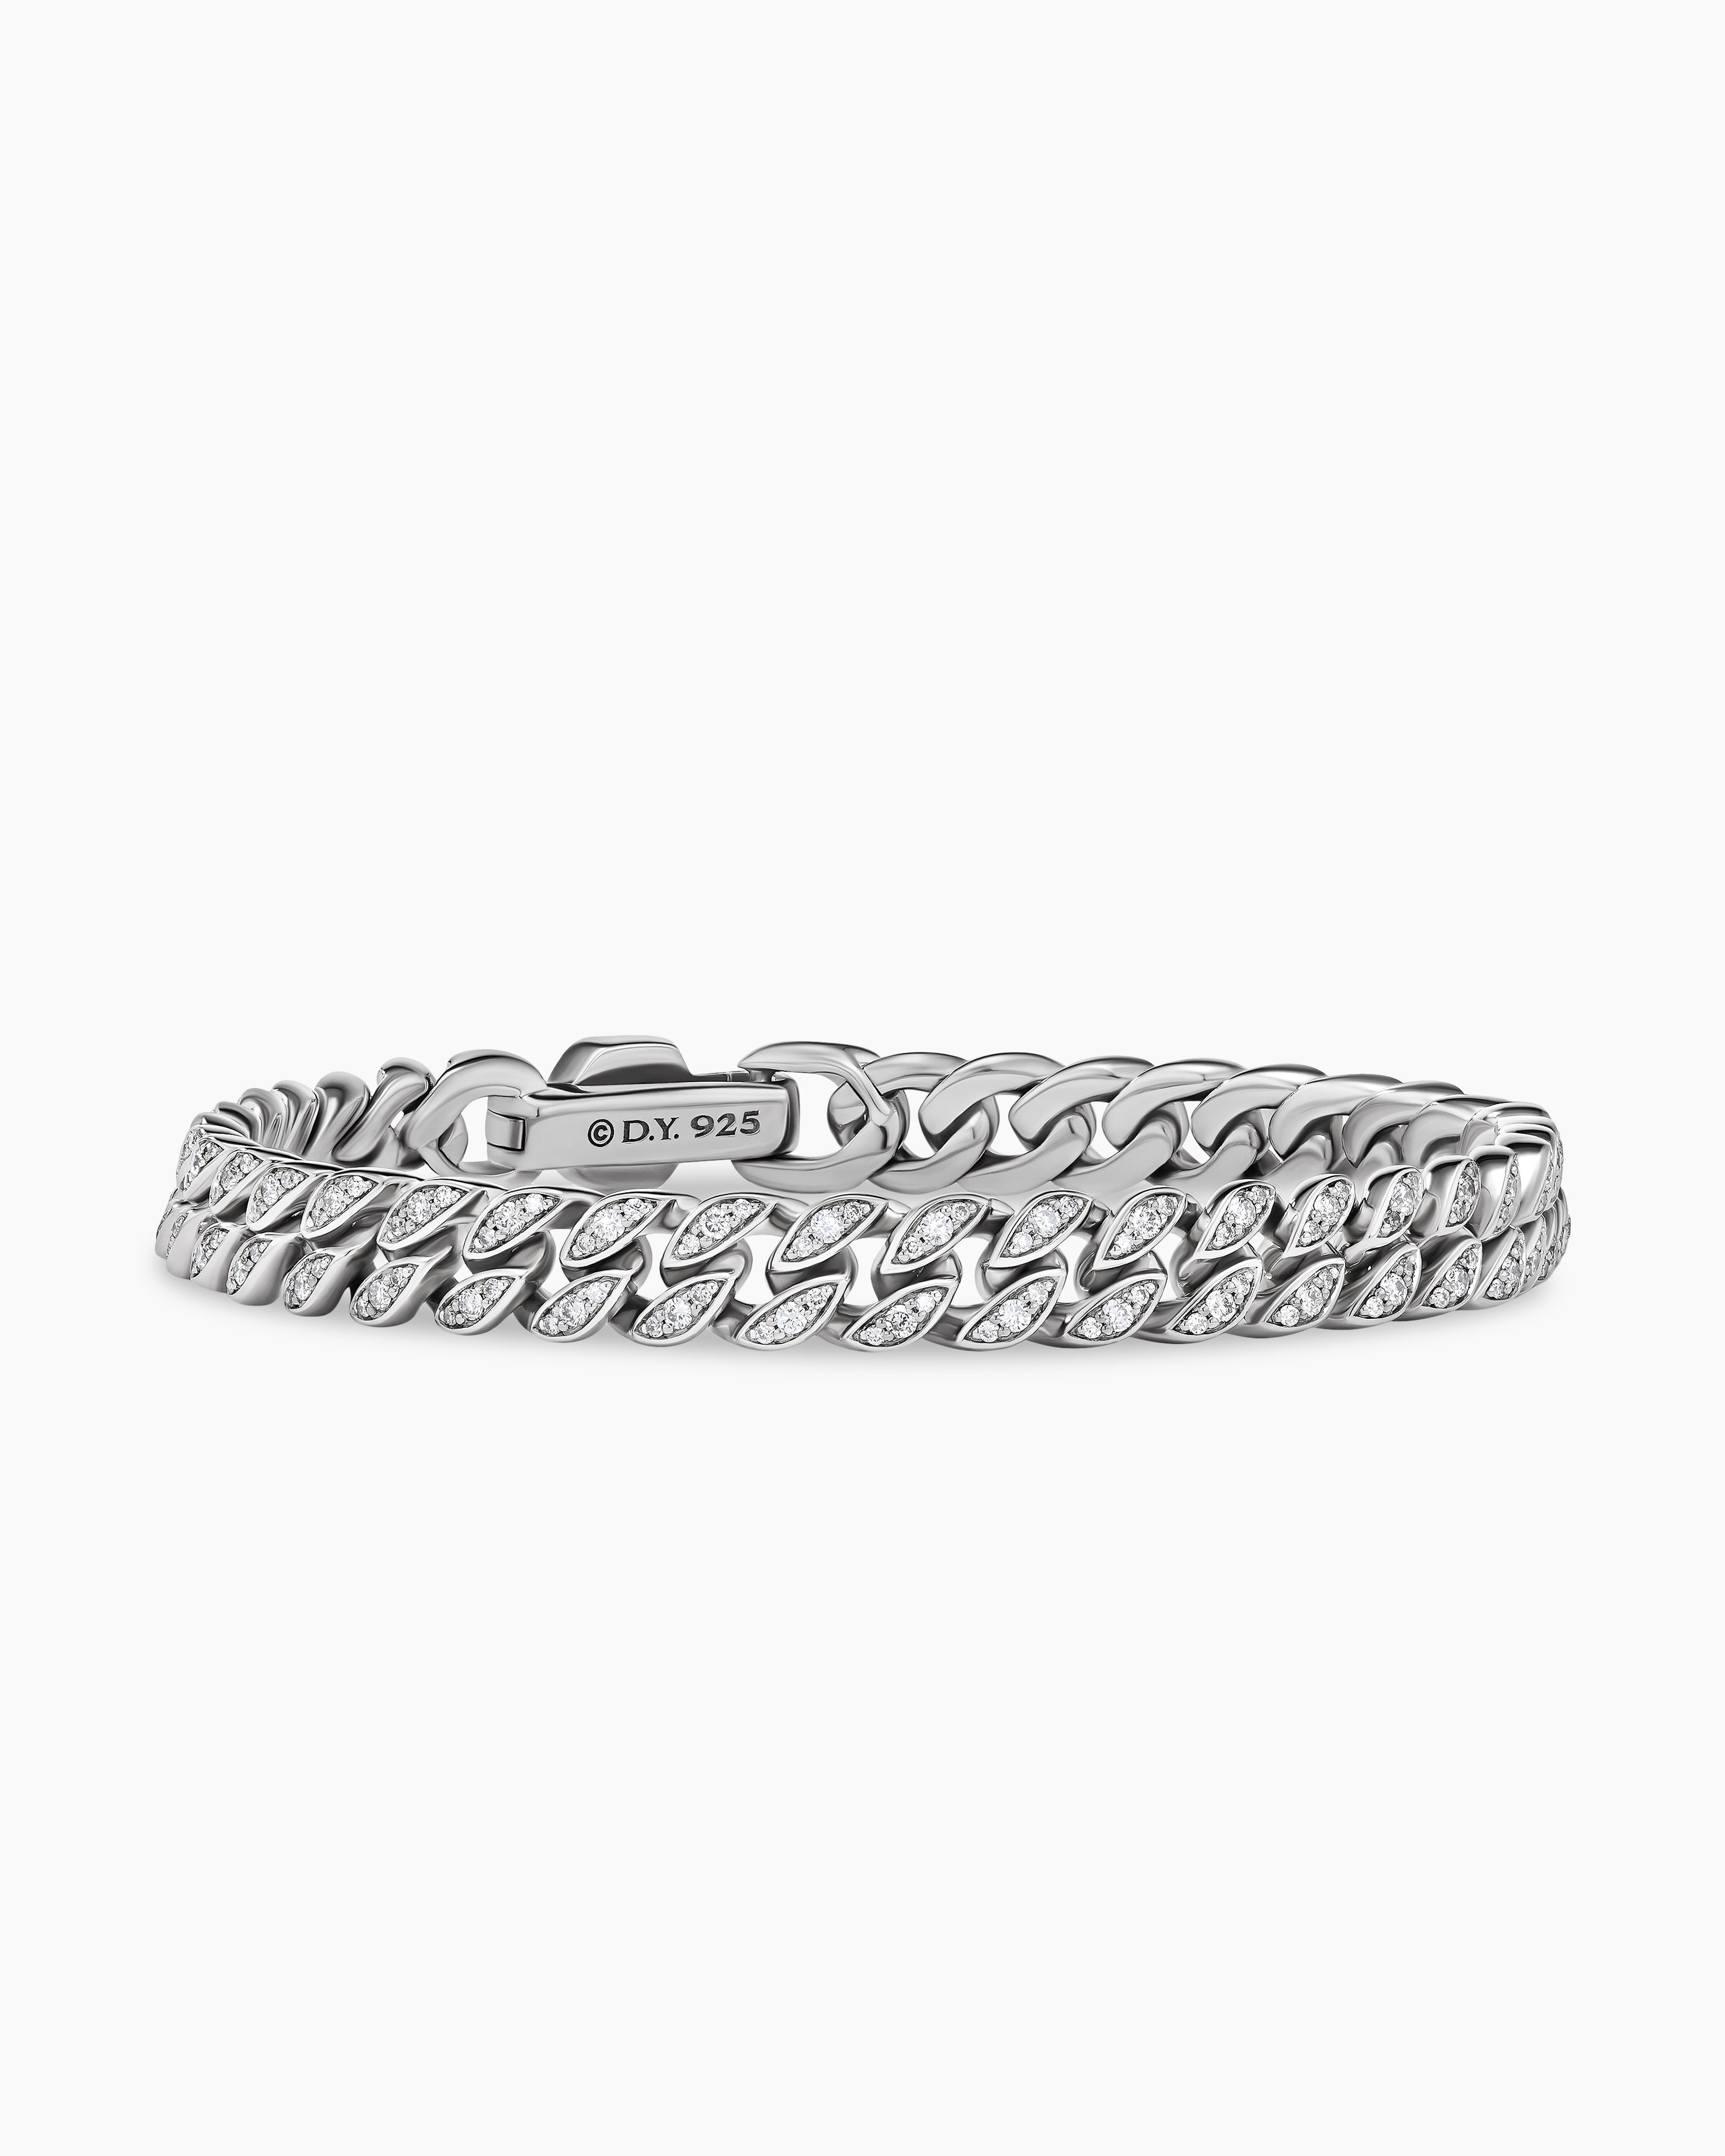 David Yurman Cable Classic Center Station Bracelet with Pave Diamonds in  Sterling Silver, size small | Lee Michaels Fine Jewelry stores